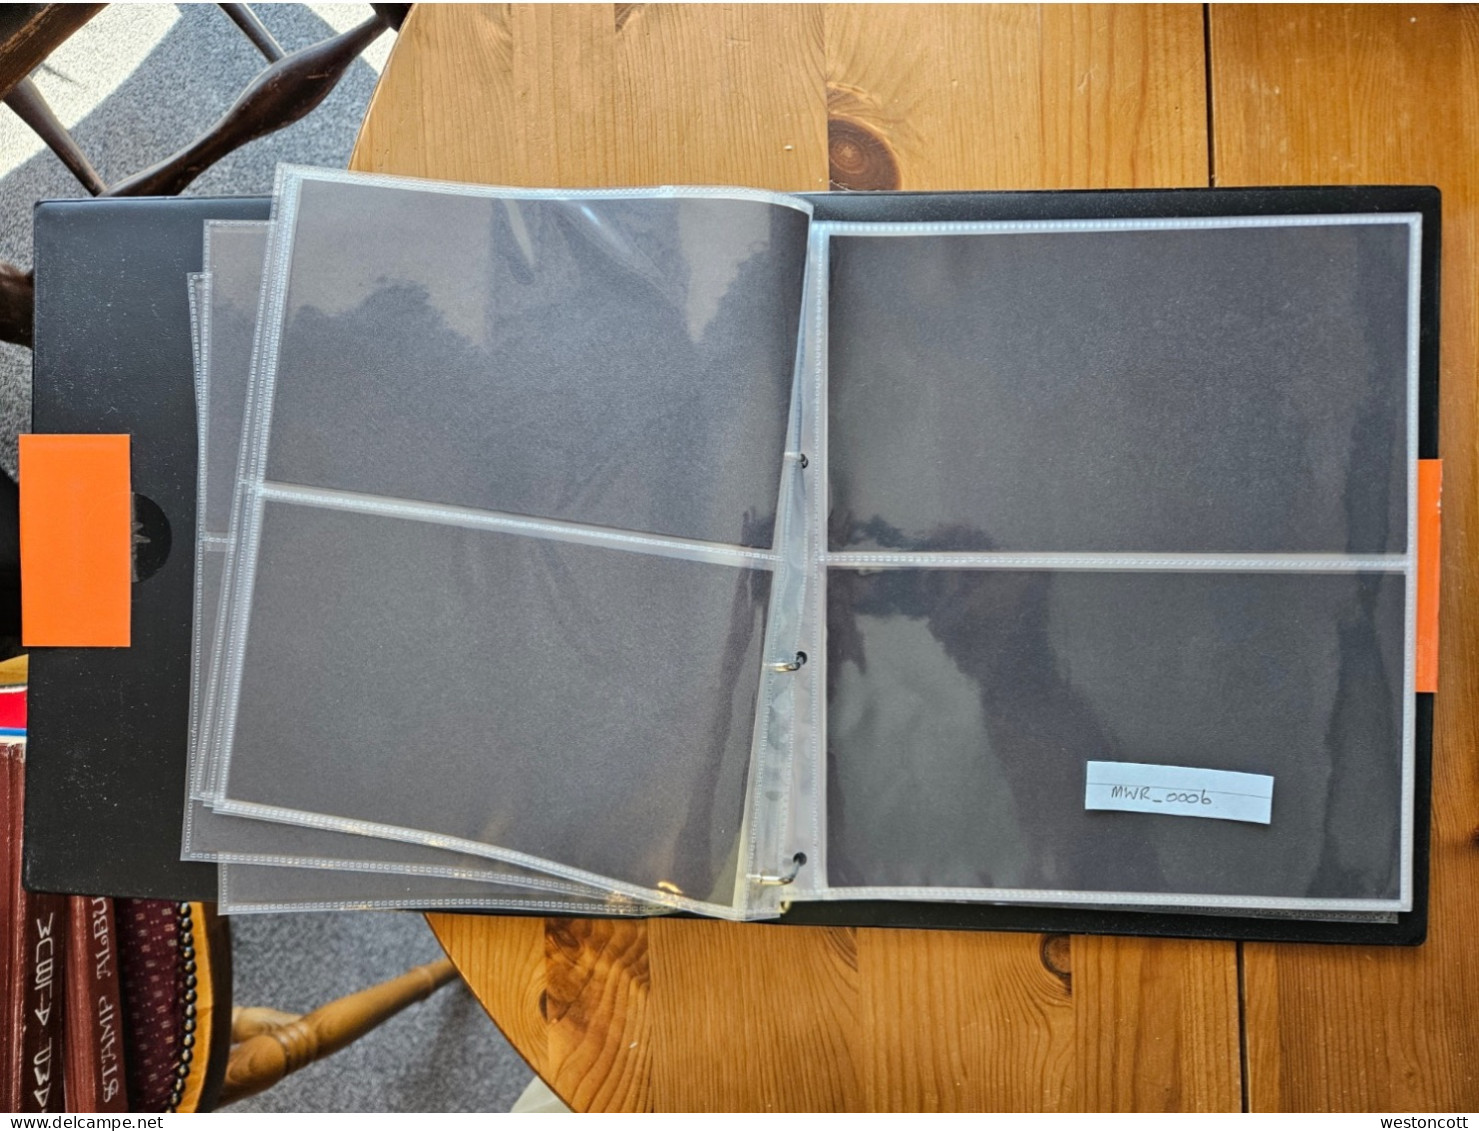 New Condition First Day Cover Album, 15 Pages, 30 Sides, 60 Pockets, BLACK - Reliures Et Feuilles